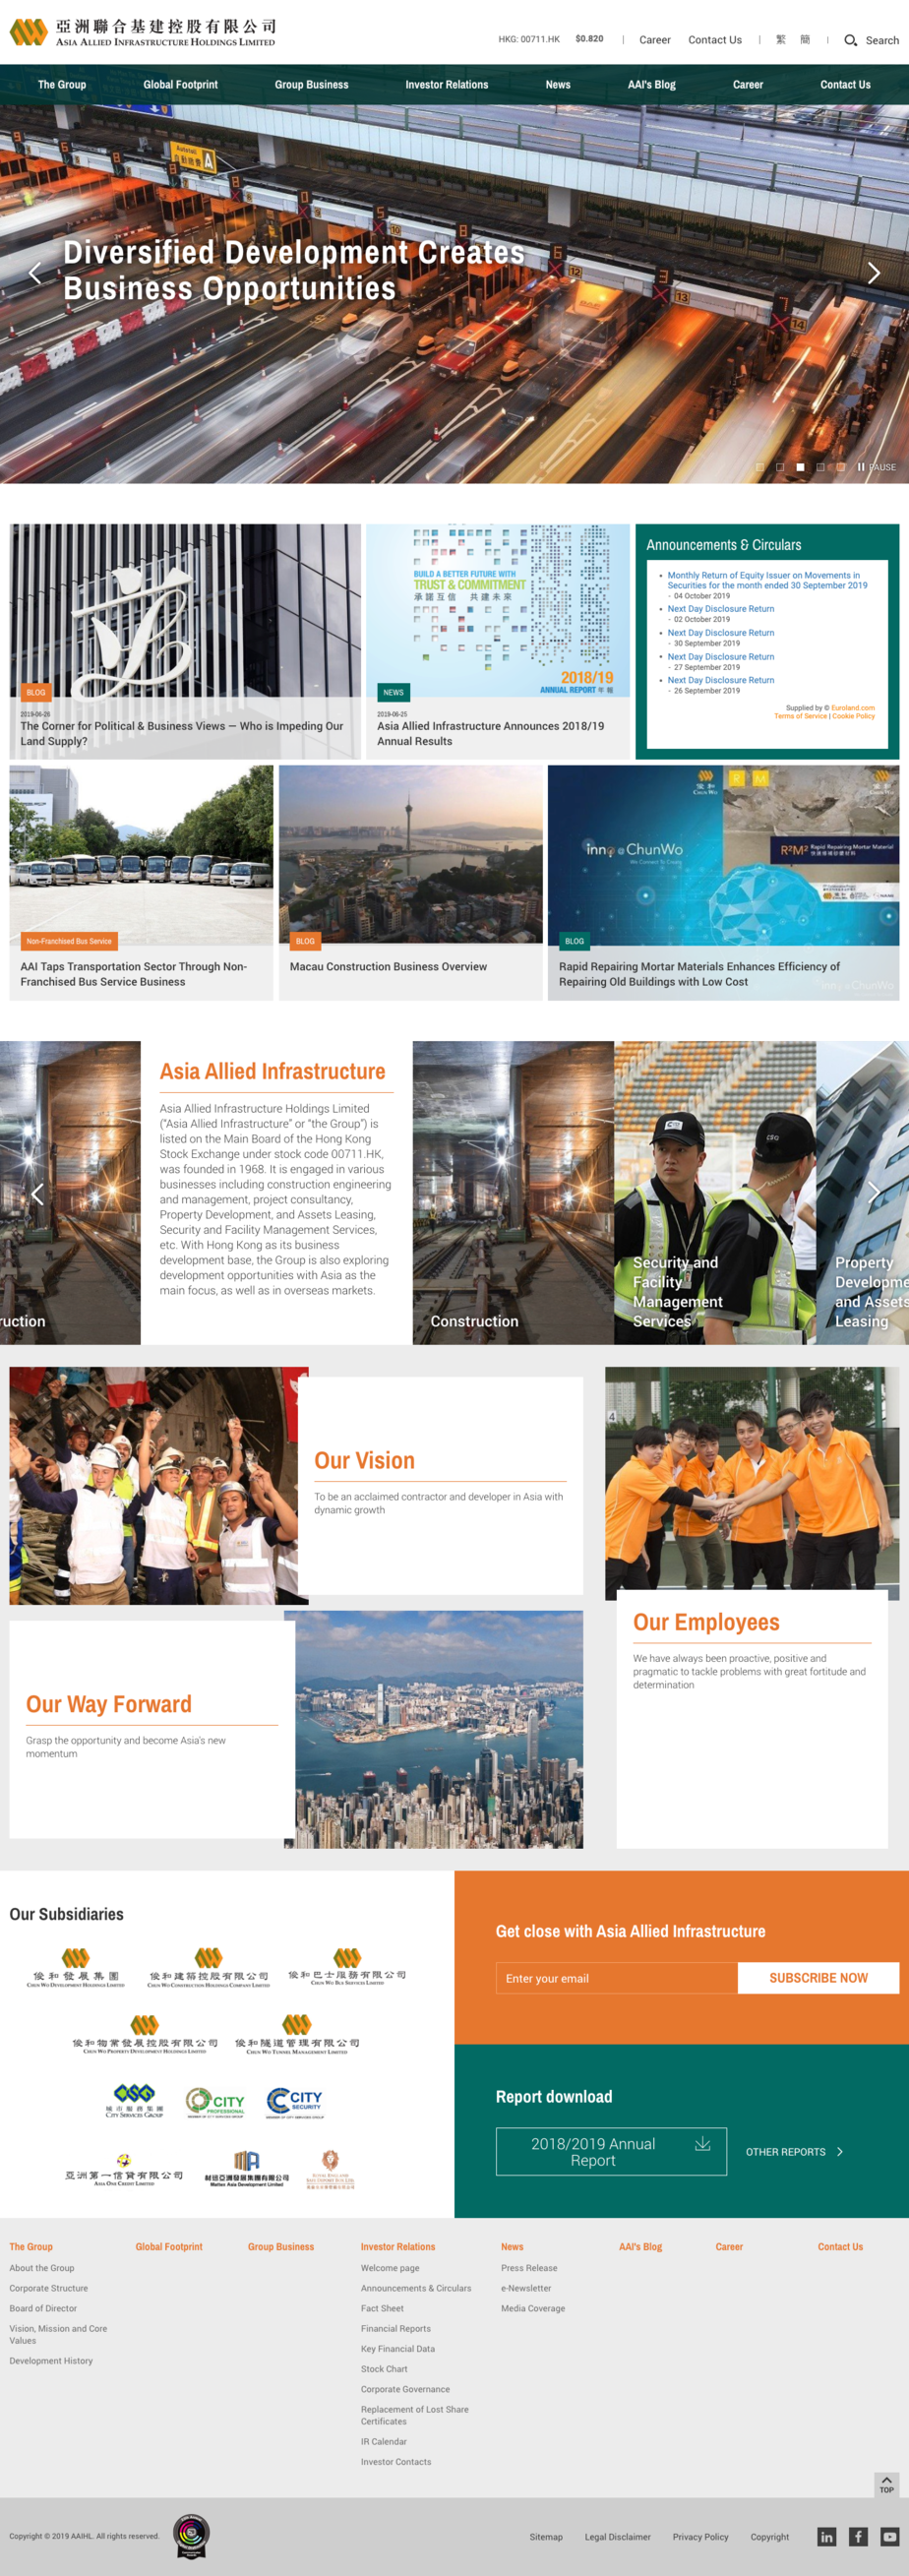 Asia Allied Infrastructure Holdings Limited website screenshot for desktop version 1 of 5